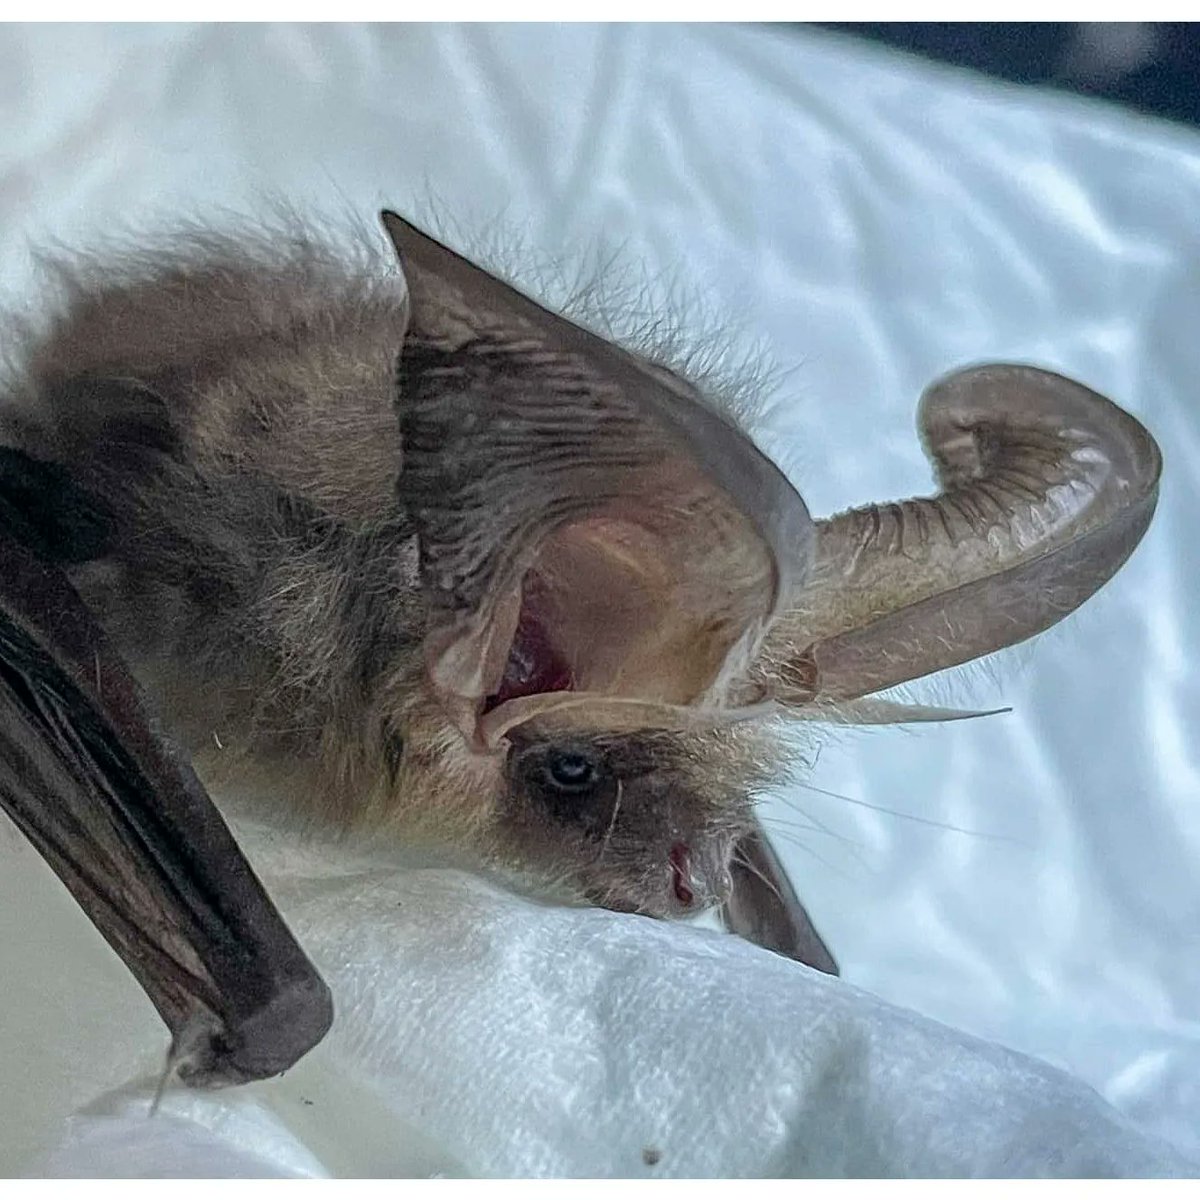 Long eared Bat collected from a local card shop, was assessed by one of our trained volunteers and released 😀